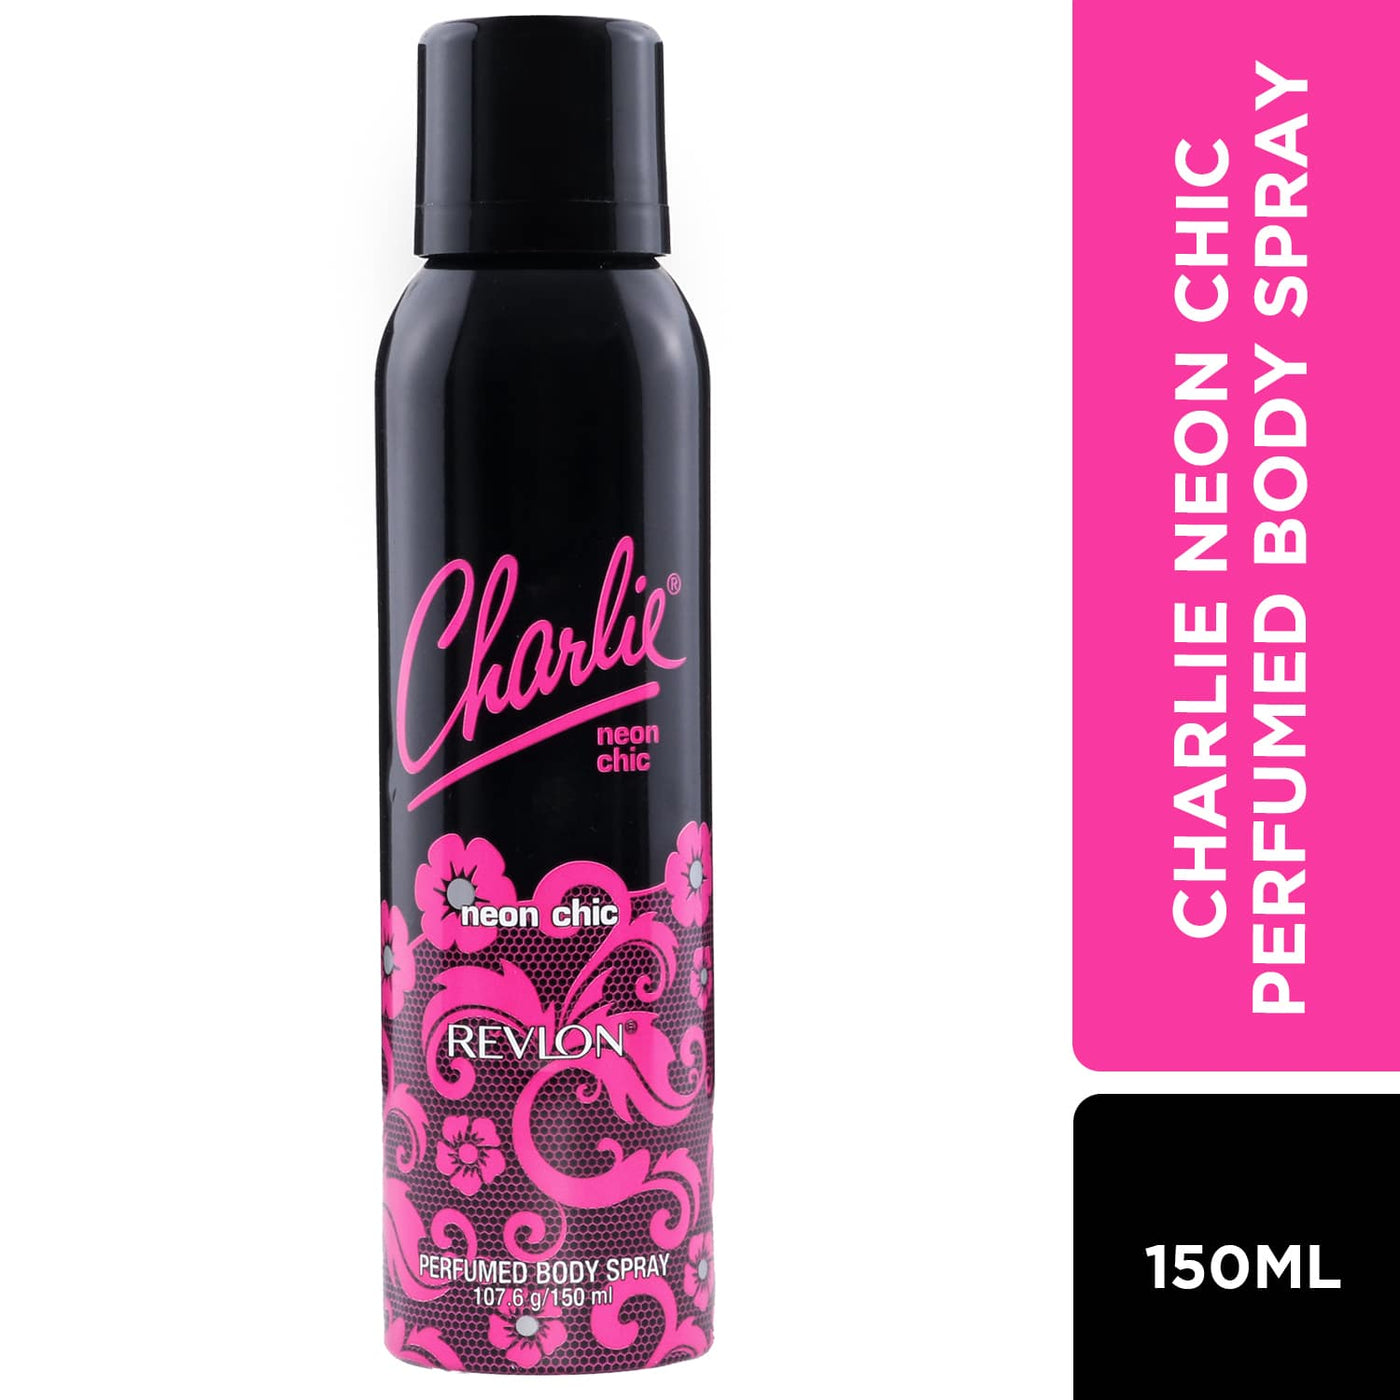 Charlie Neon Chic Perfumed Body Spray - Special Offer